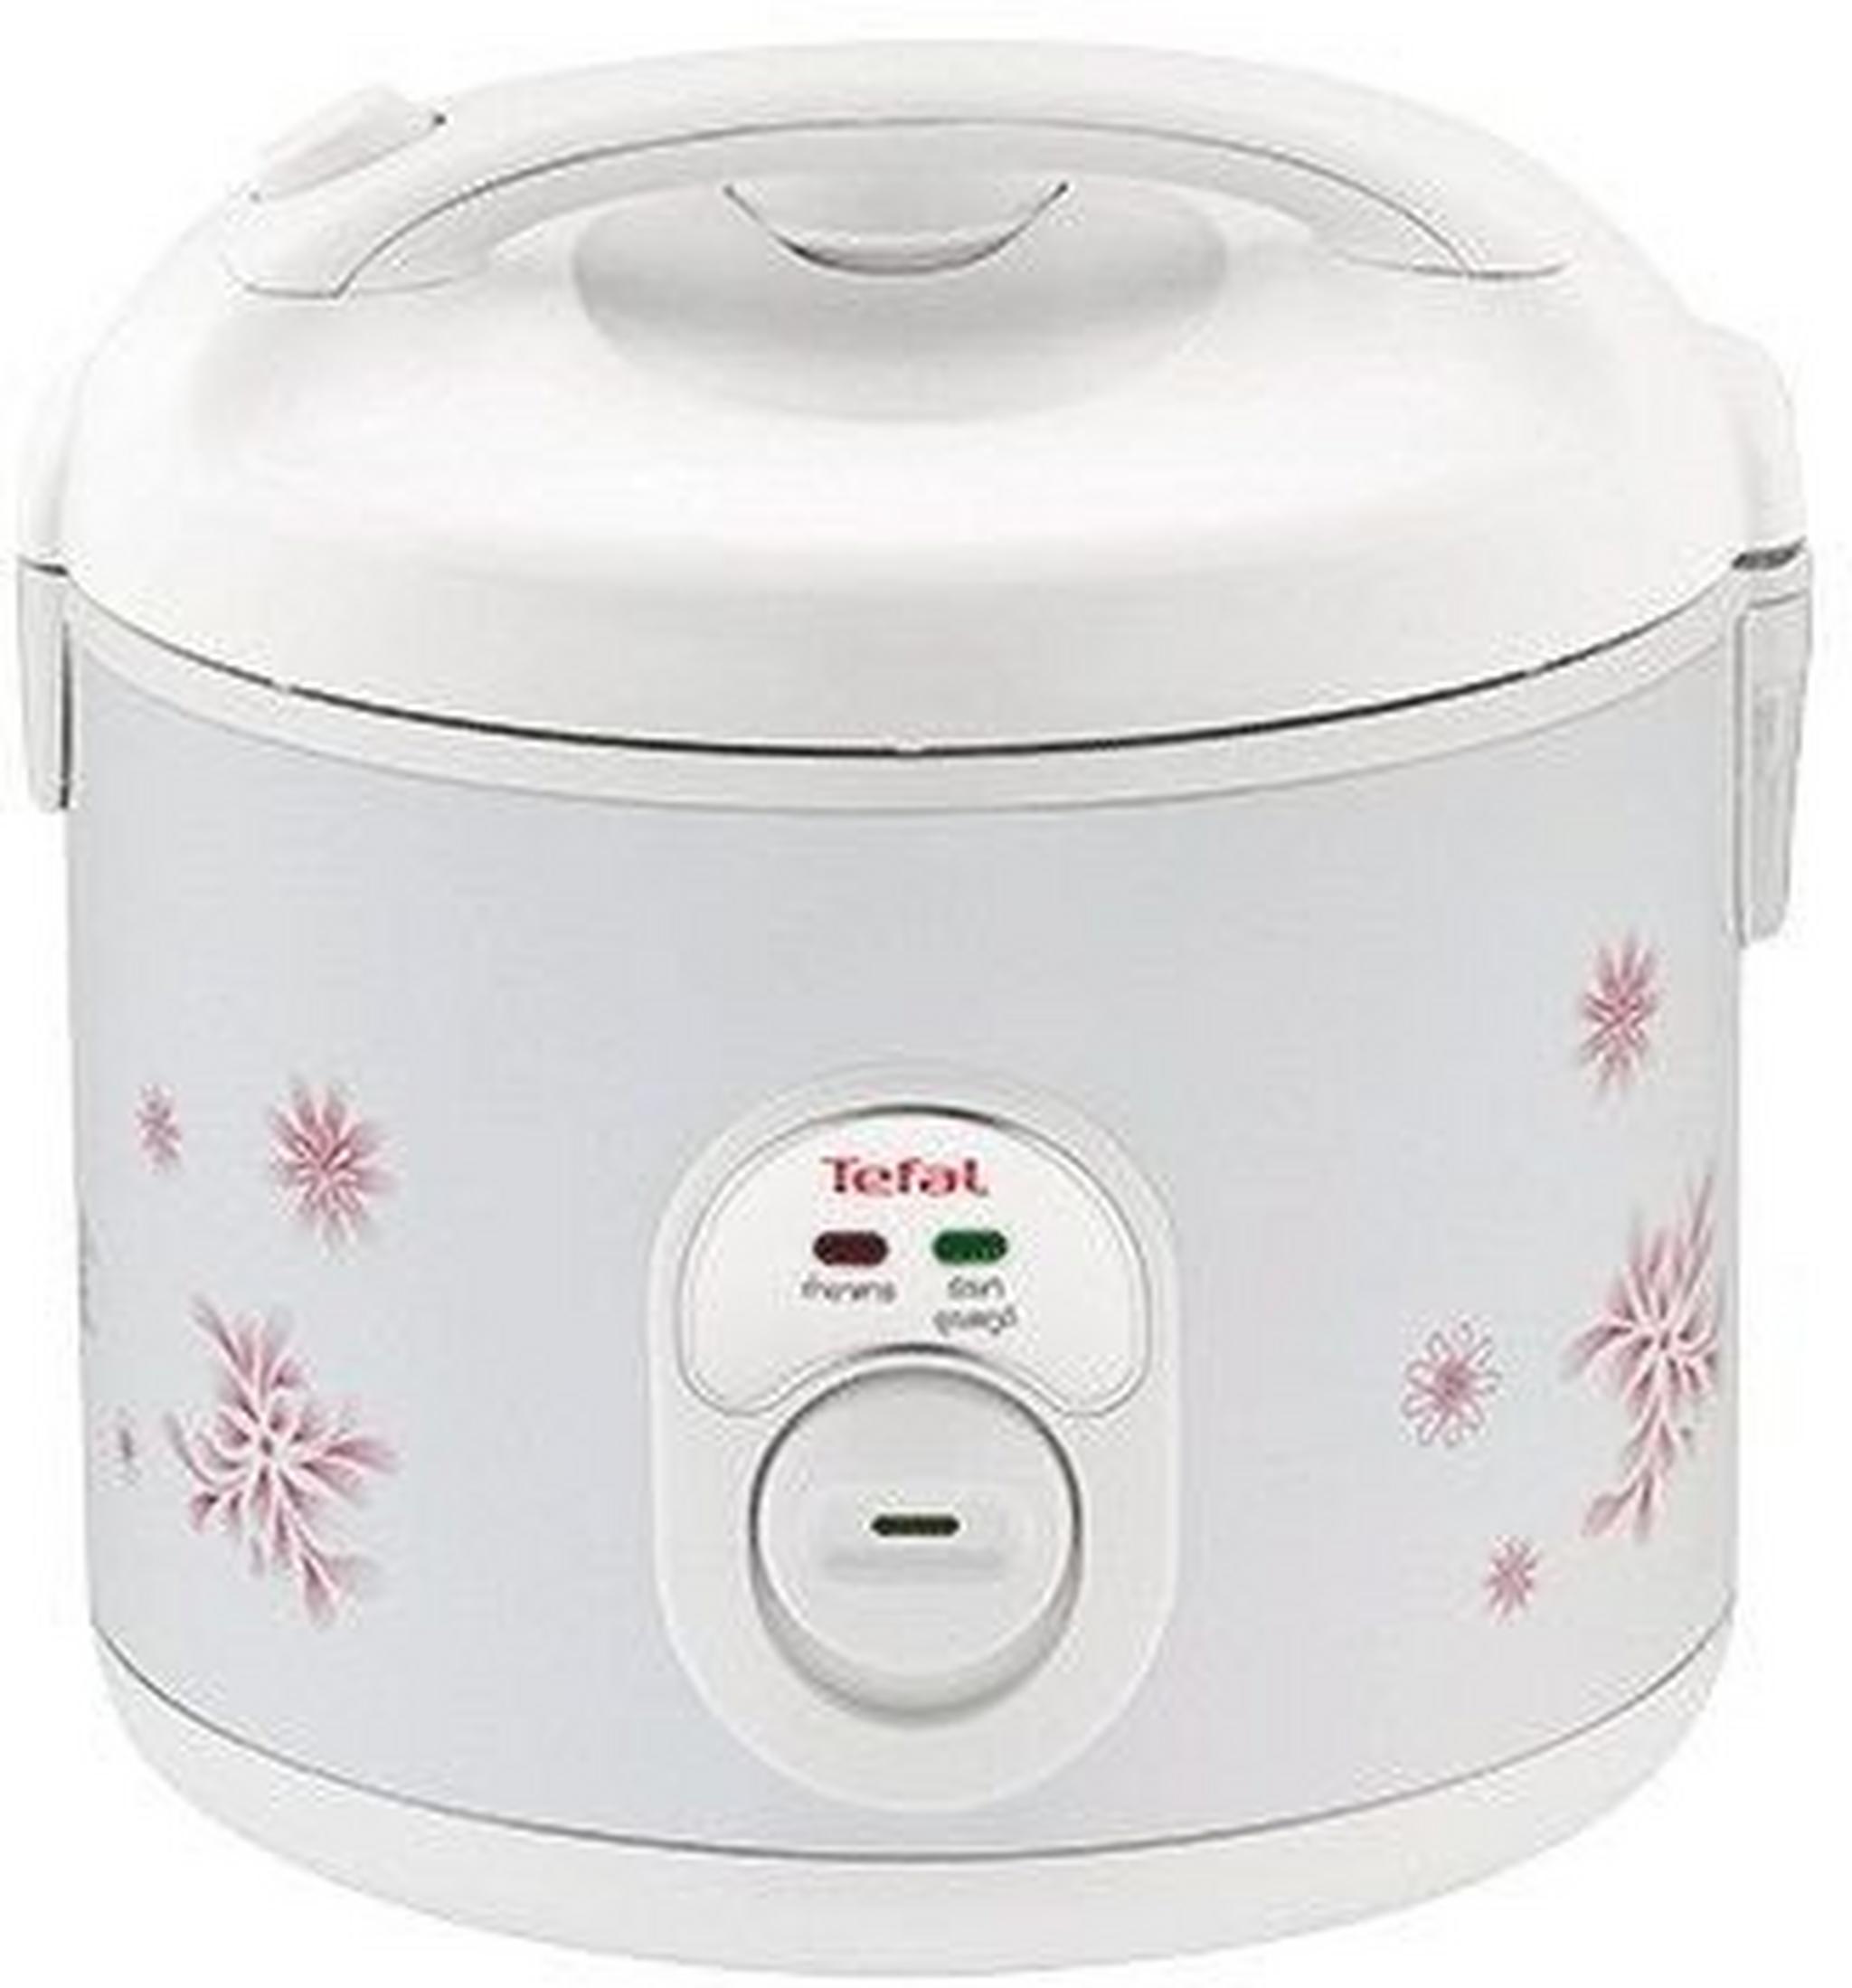 Tefal Electric Rice Cooker RK101827